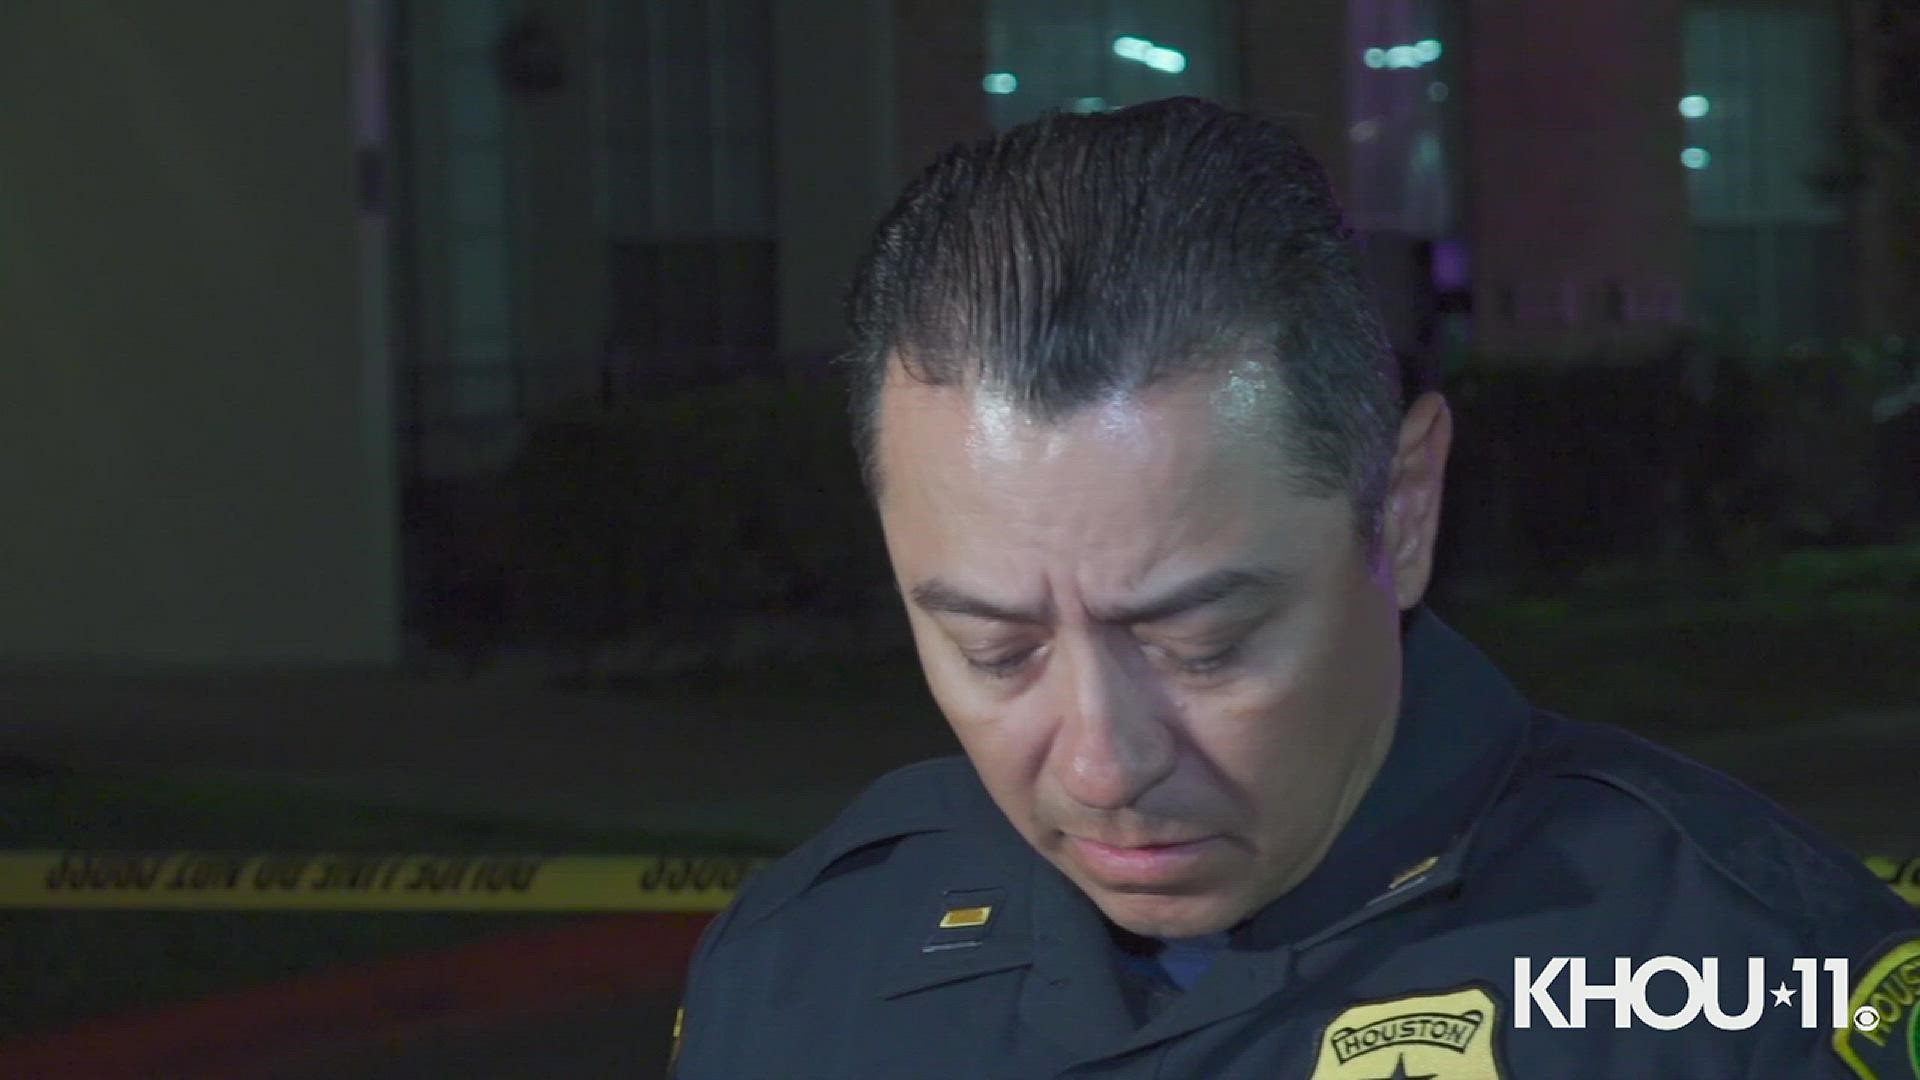 A man crashed into several parked cars trying to escape after being shot several times in southwest Houston Wednesday night, according to Houston police.